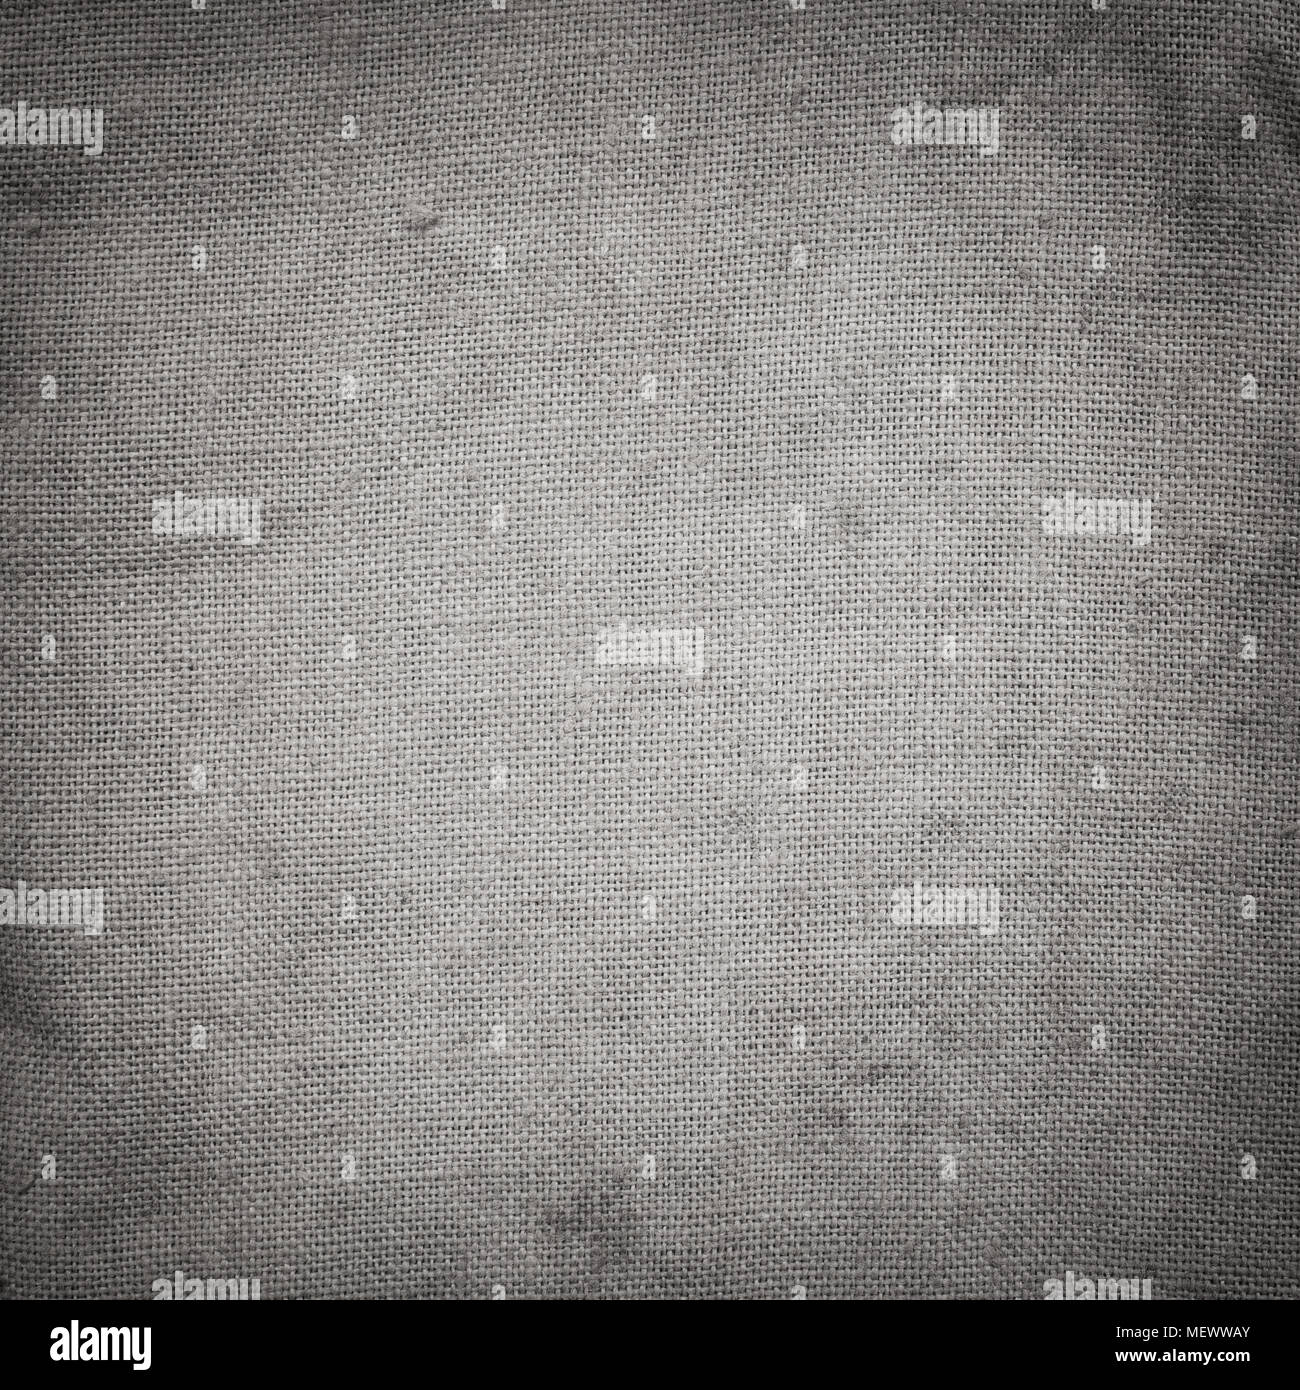 Old stained grey square creasy burlap texture. Stock Photo